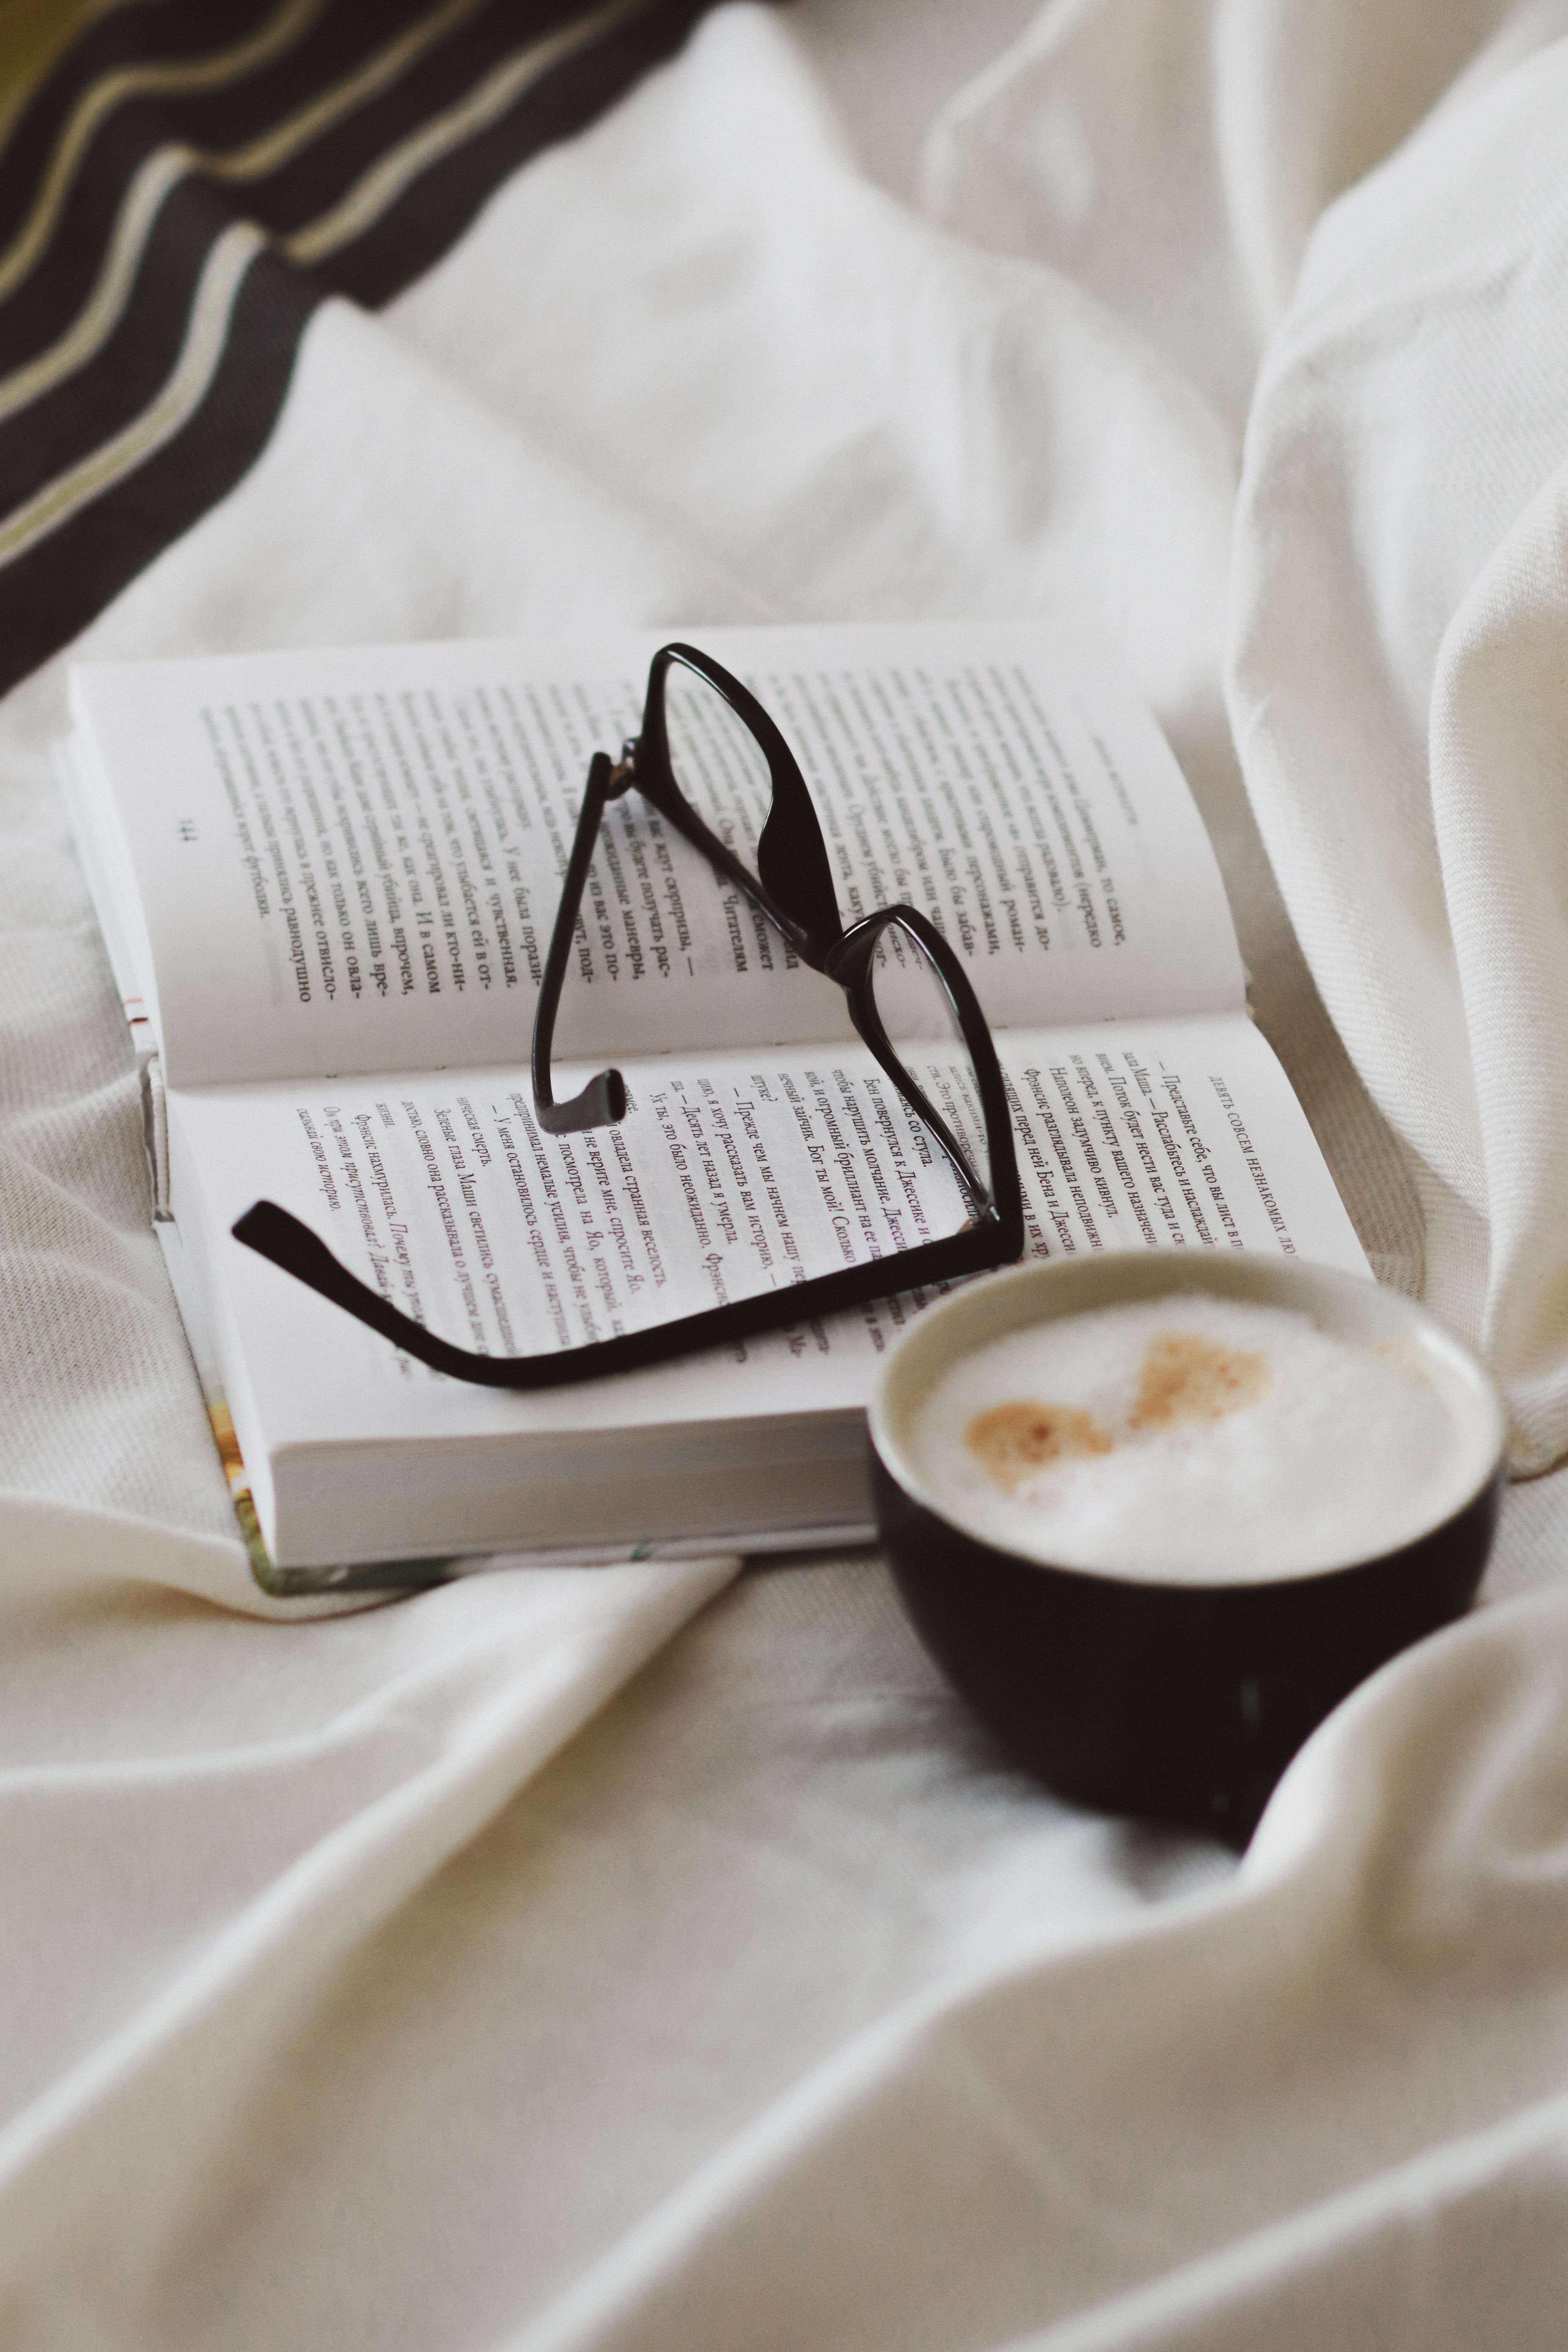 miscellanea, miscellaneous, cup, book, glasses, spectacles